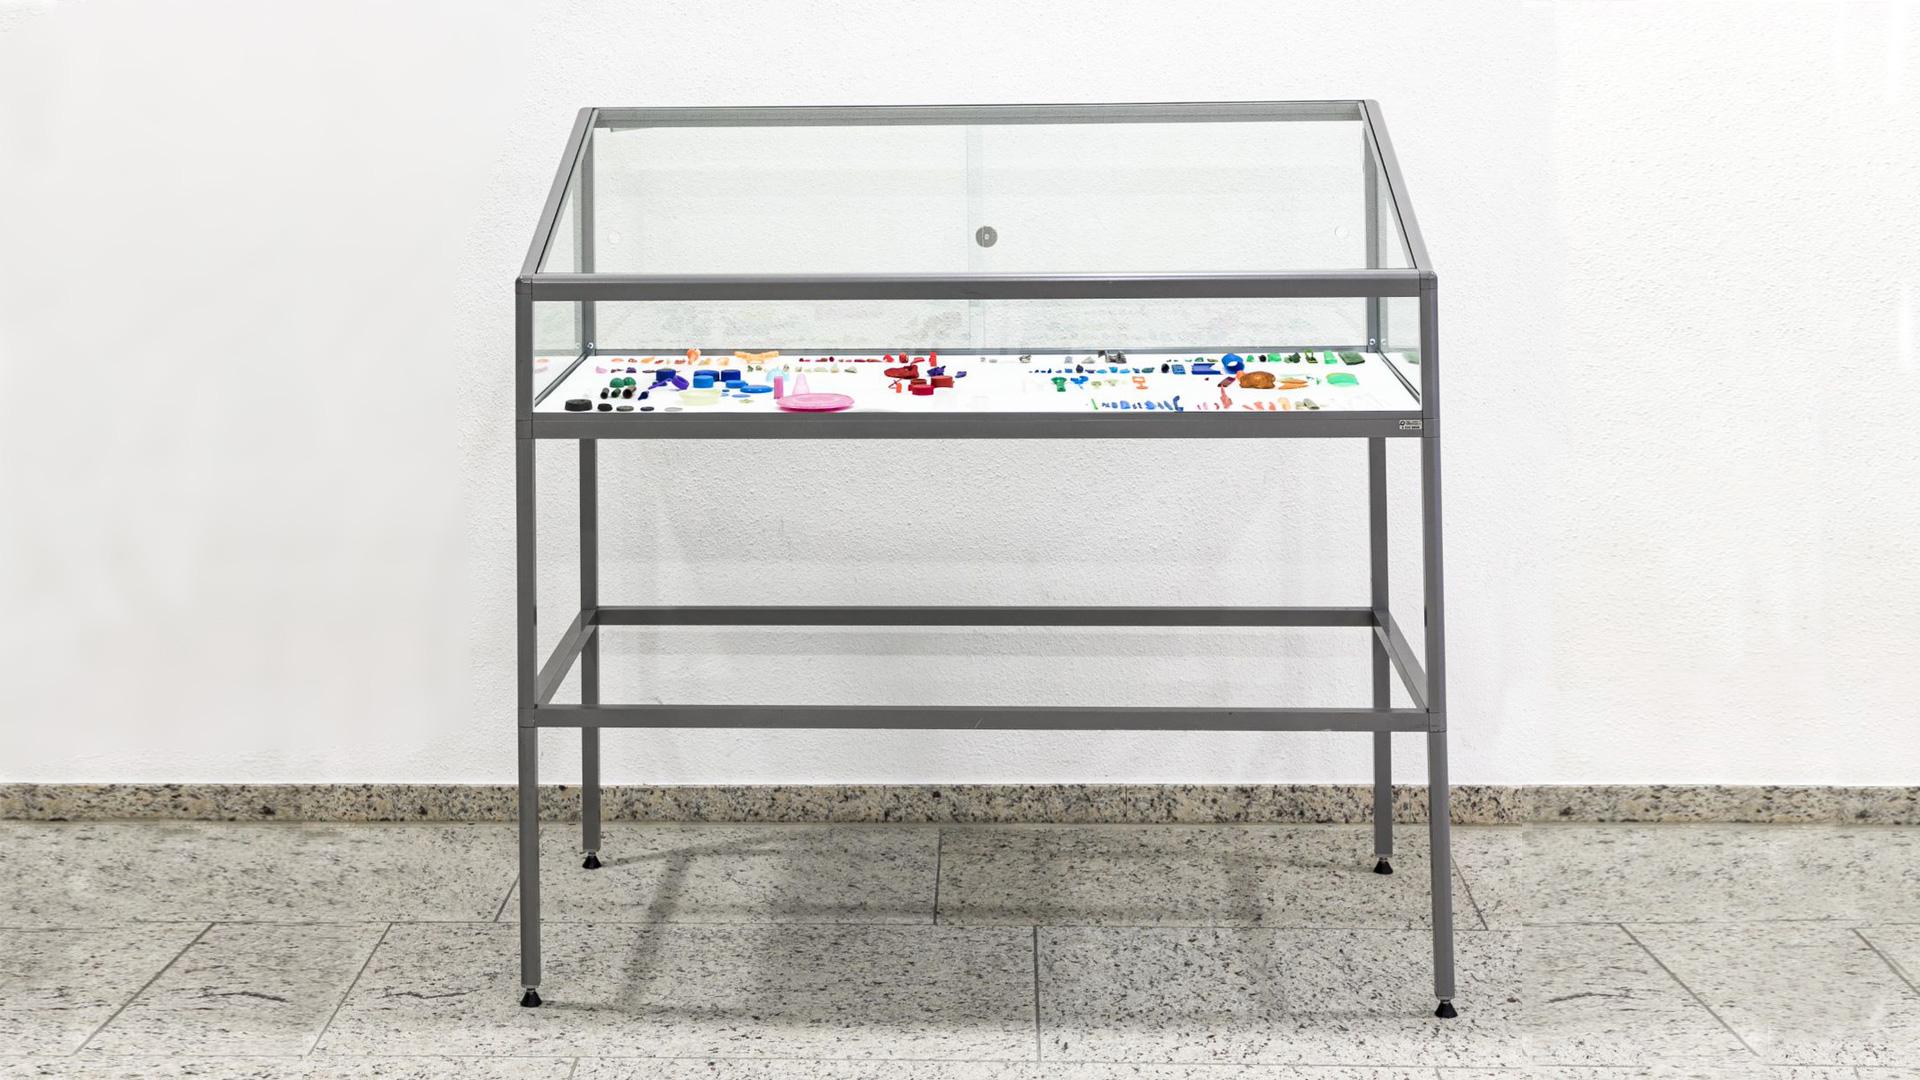 Untitled for Carl von Linné, 2011 Showcase of glass and steel, plastic 120 x 126 x 60cm